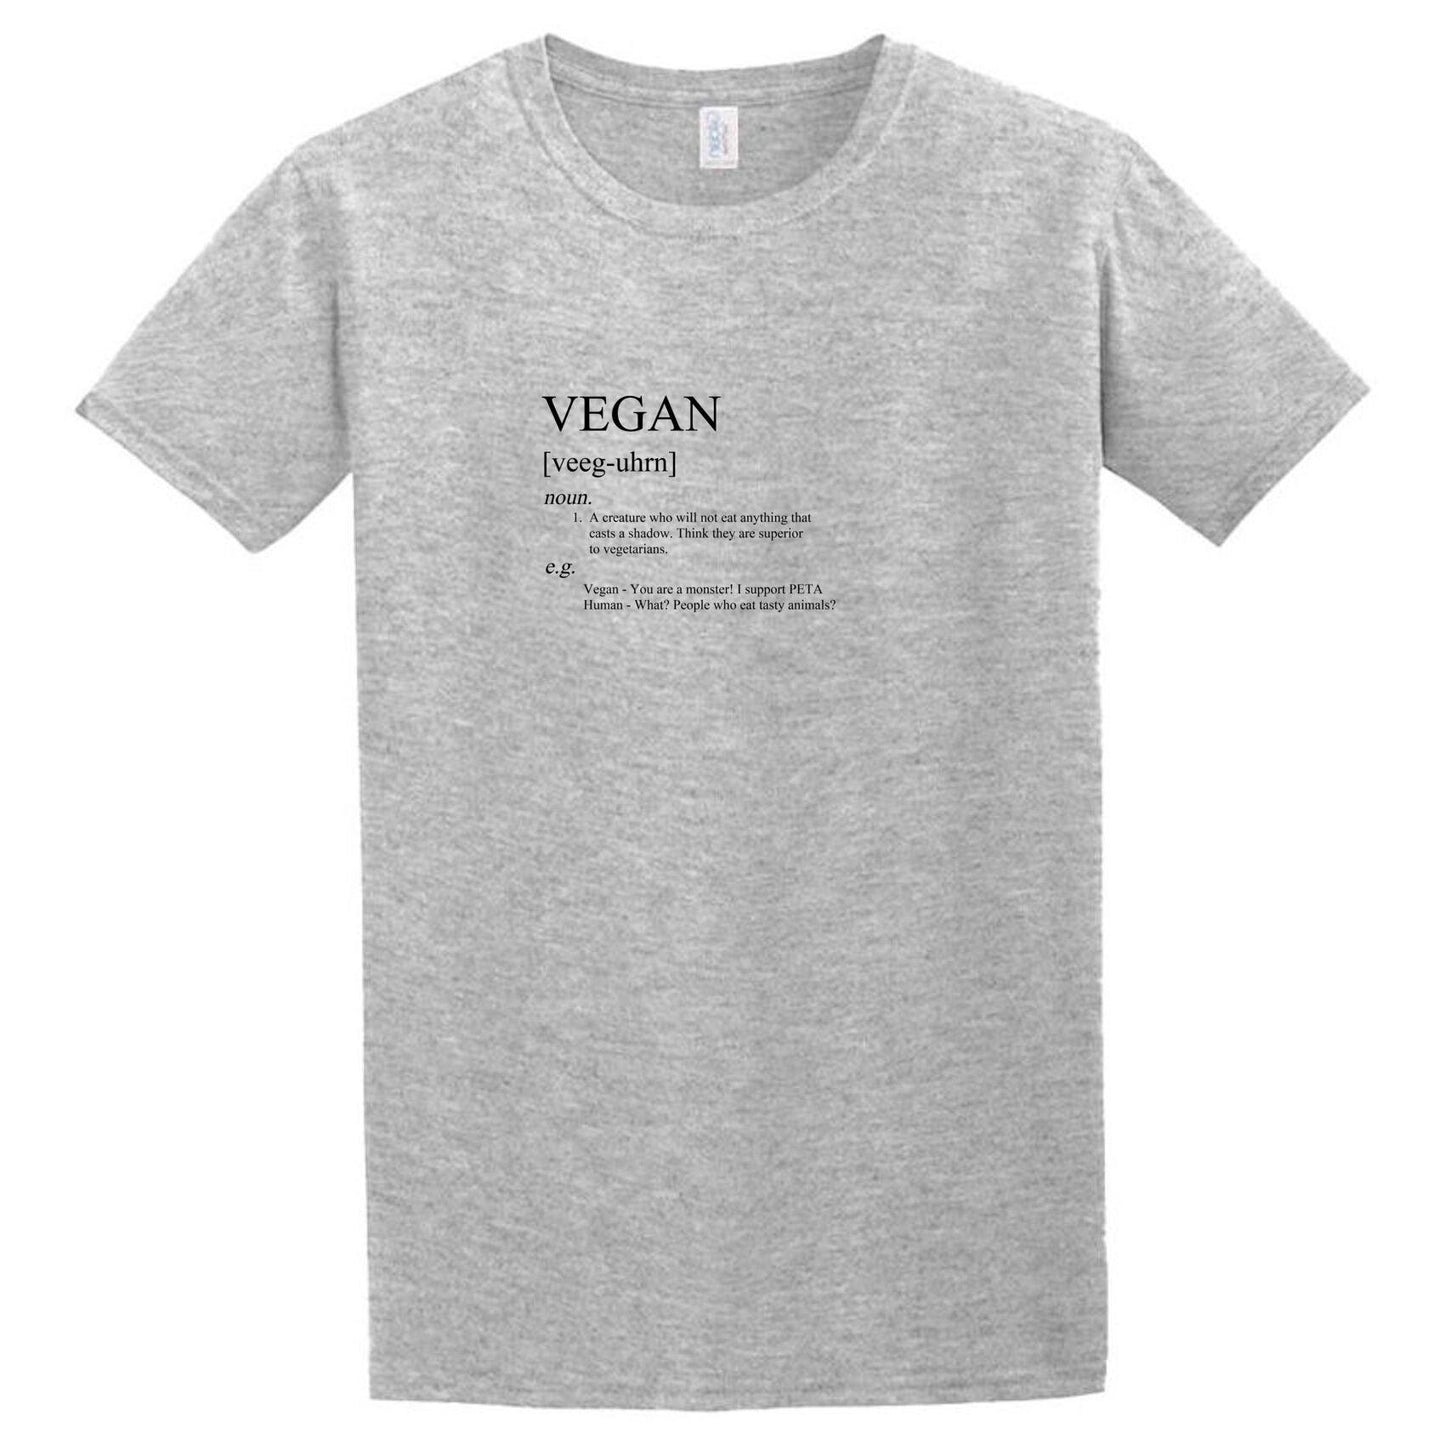 A grey Vegan T-Shirt that says vegan from Twisted Gifts.